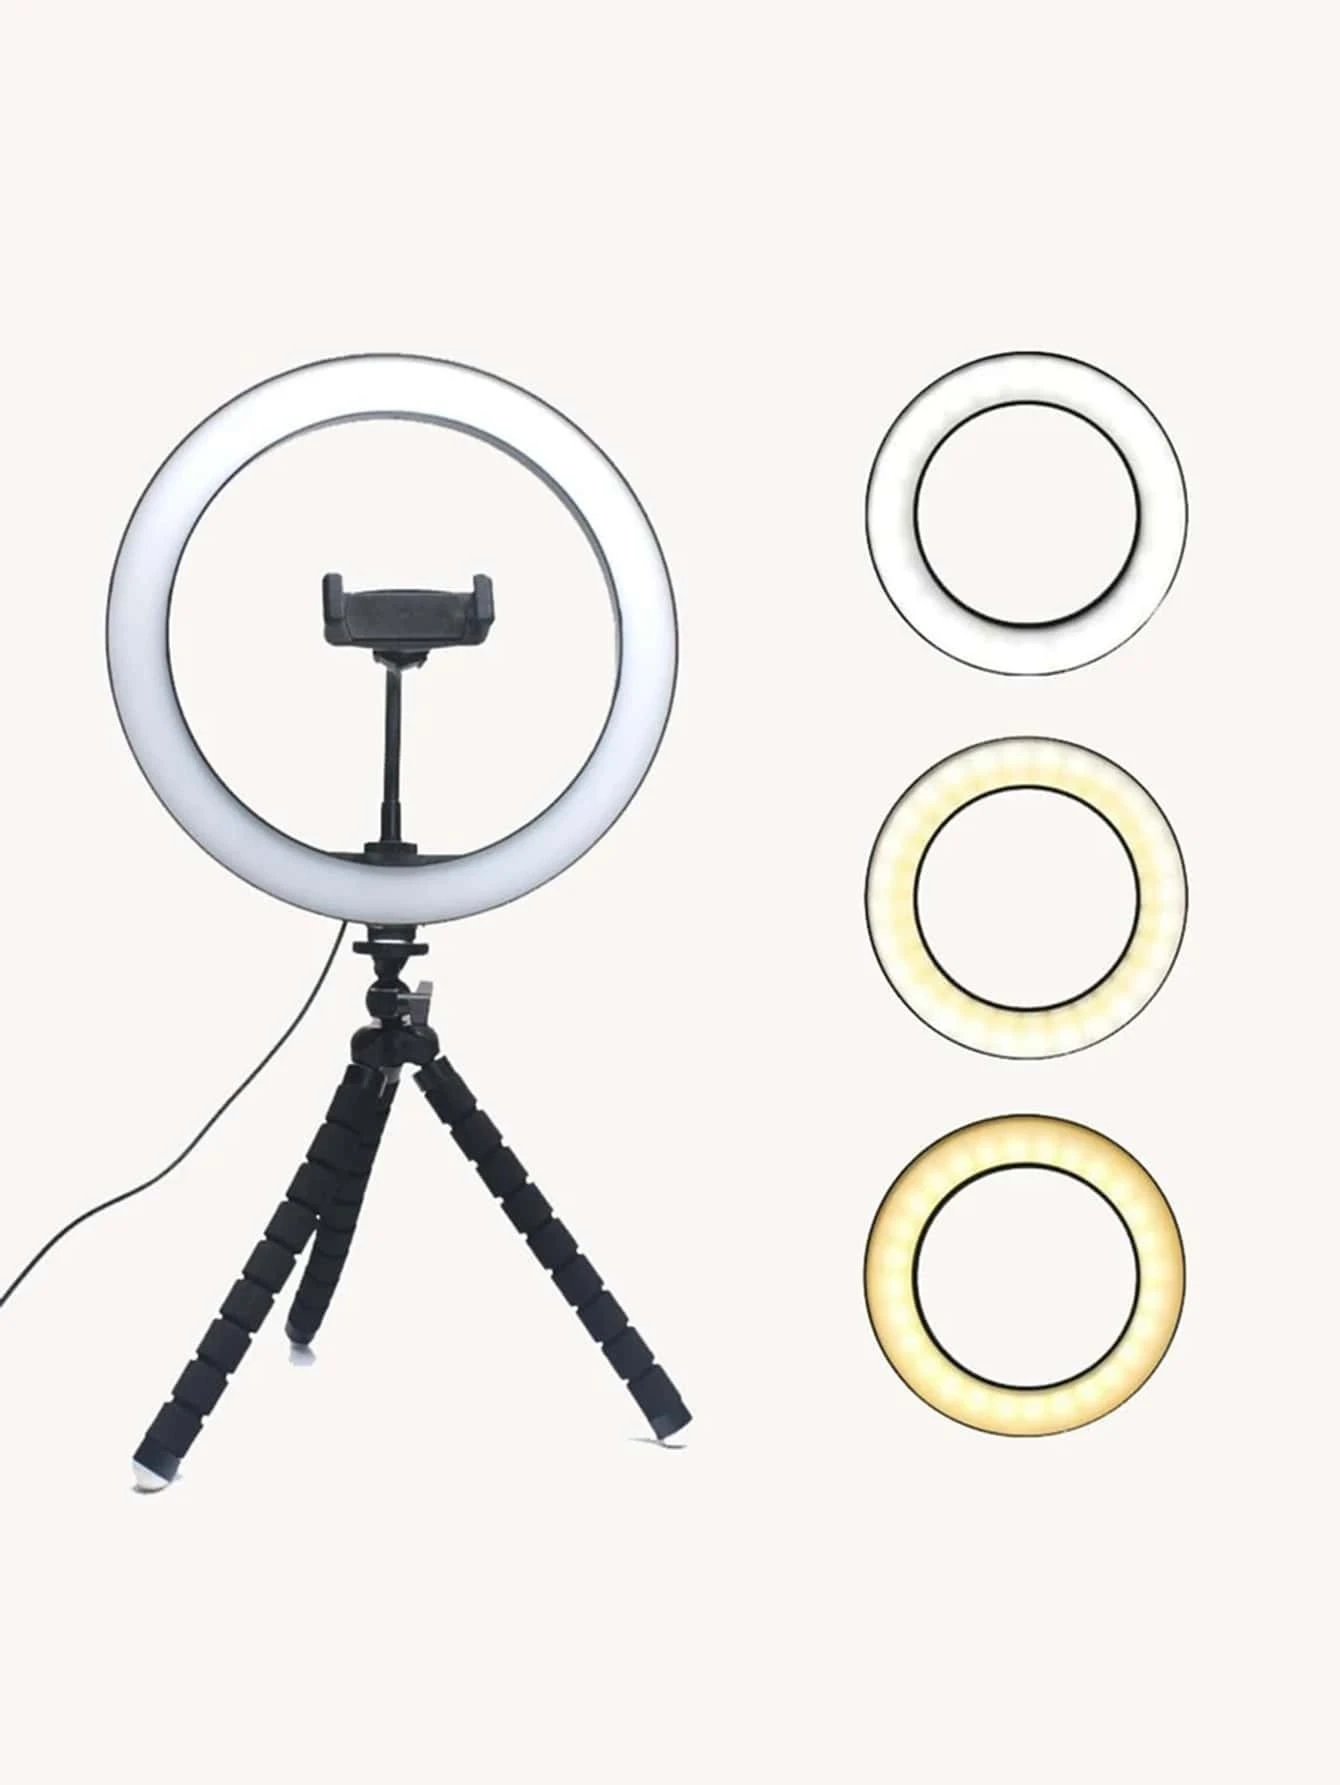  8 INCH RING LIGHT WITH TRIPOD selfie